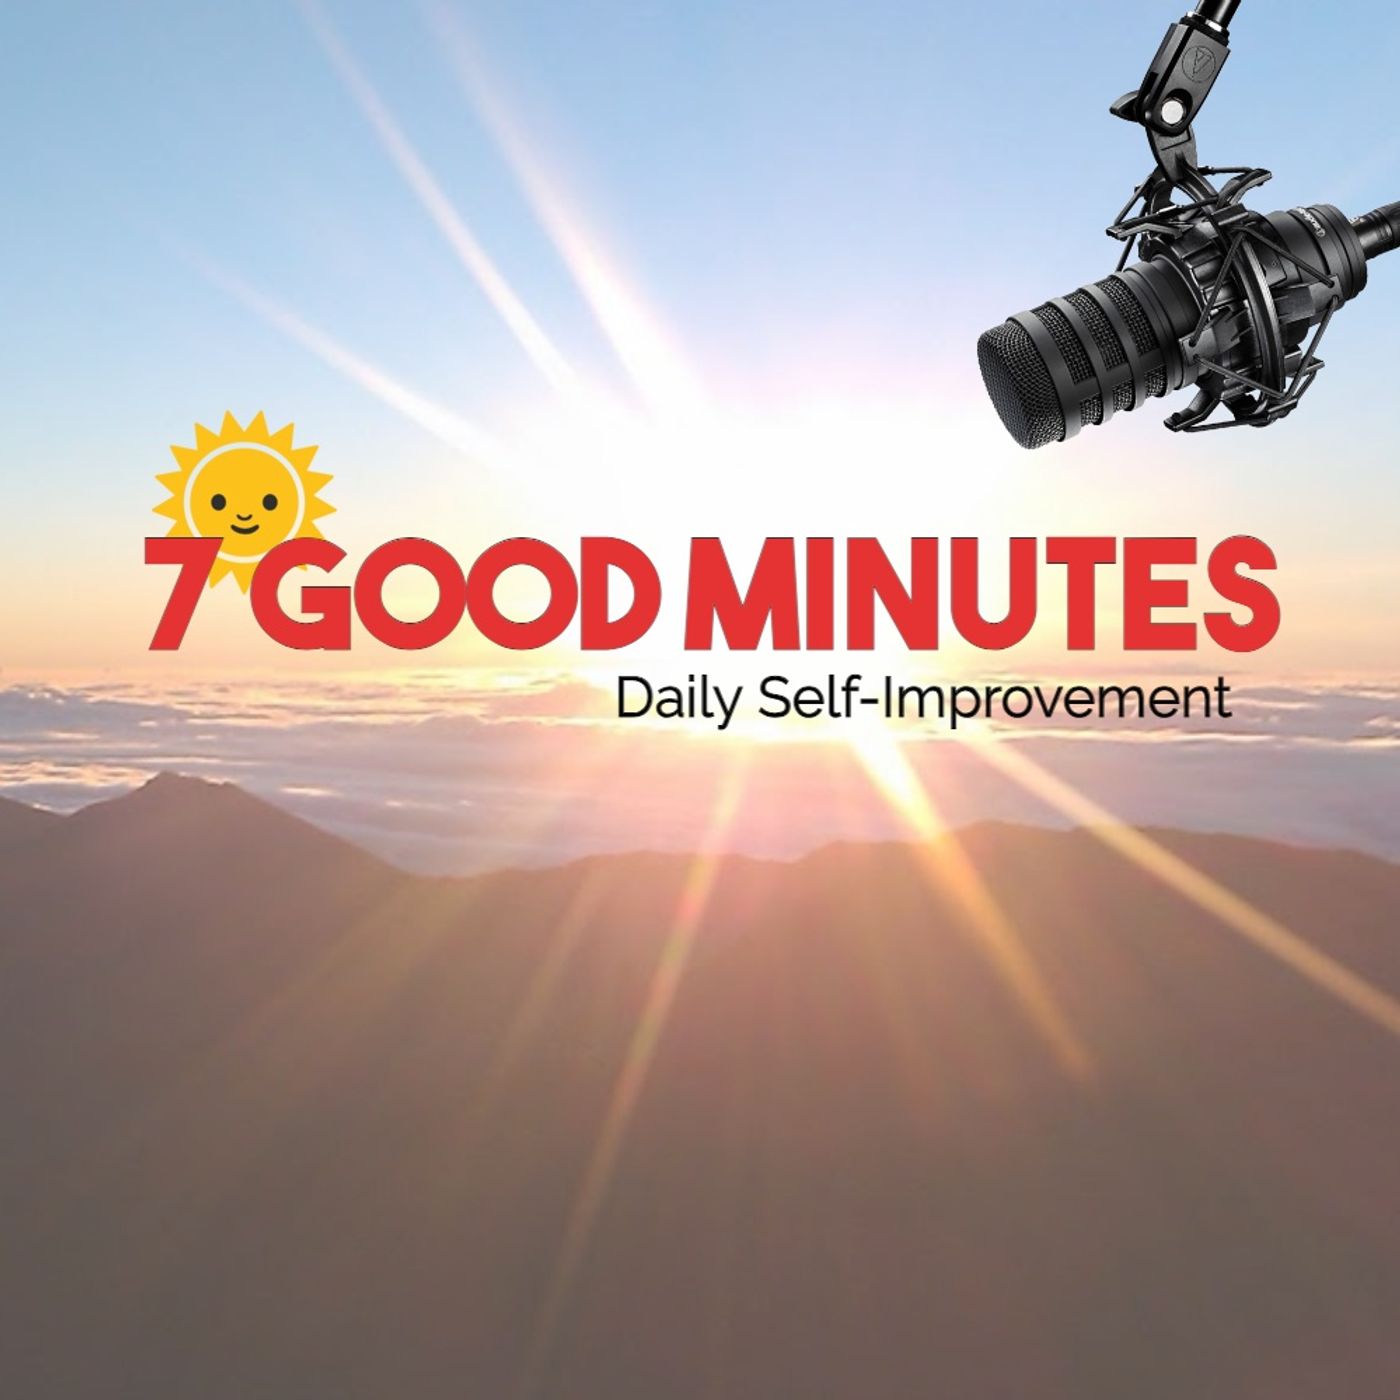 7 Good Minutes: Archived Episodes